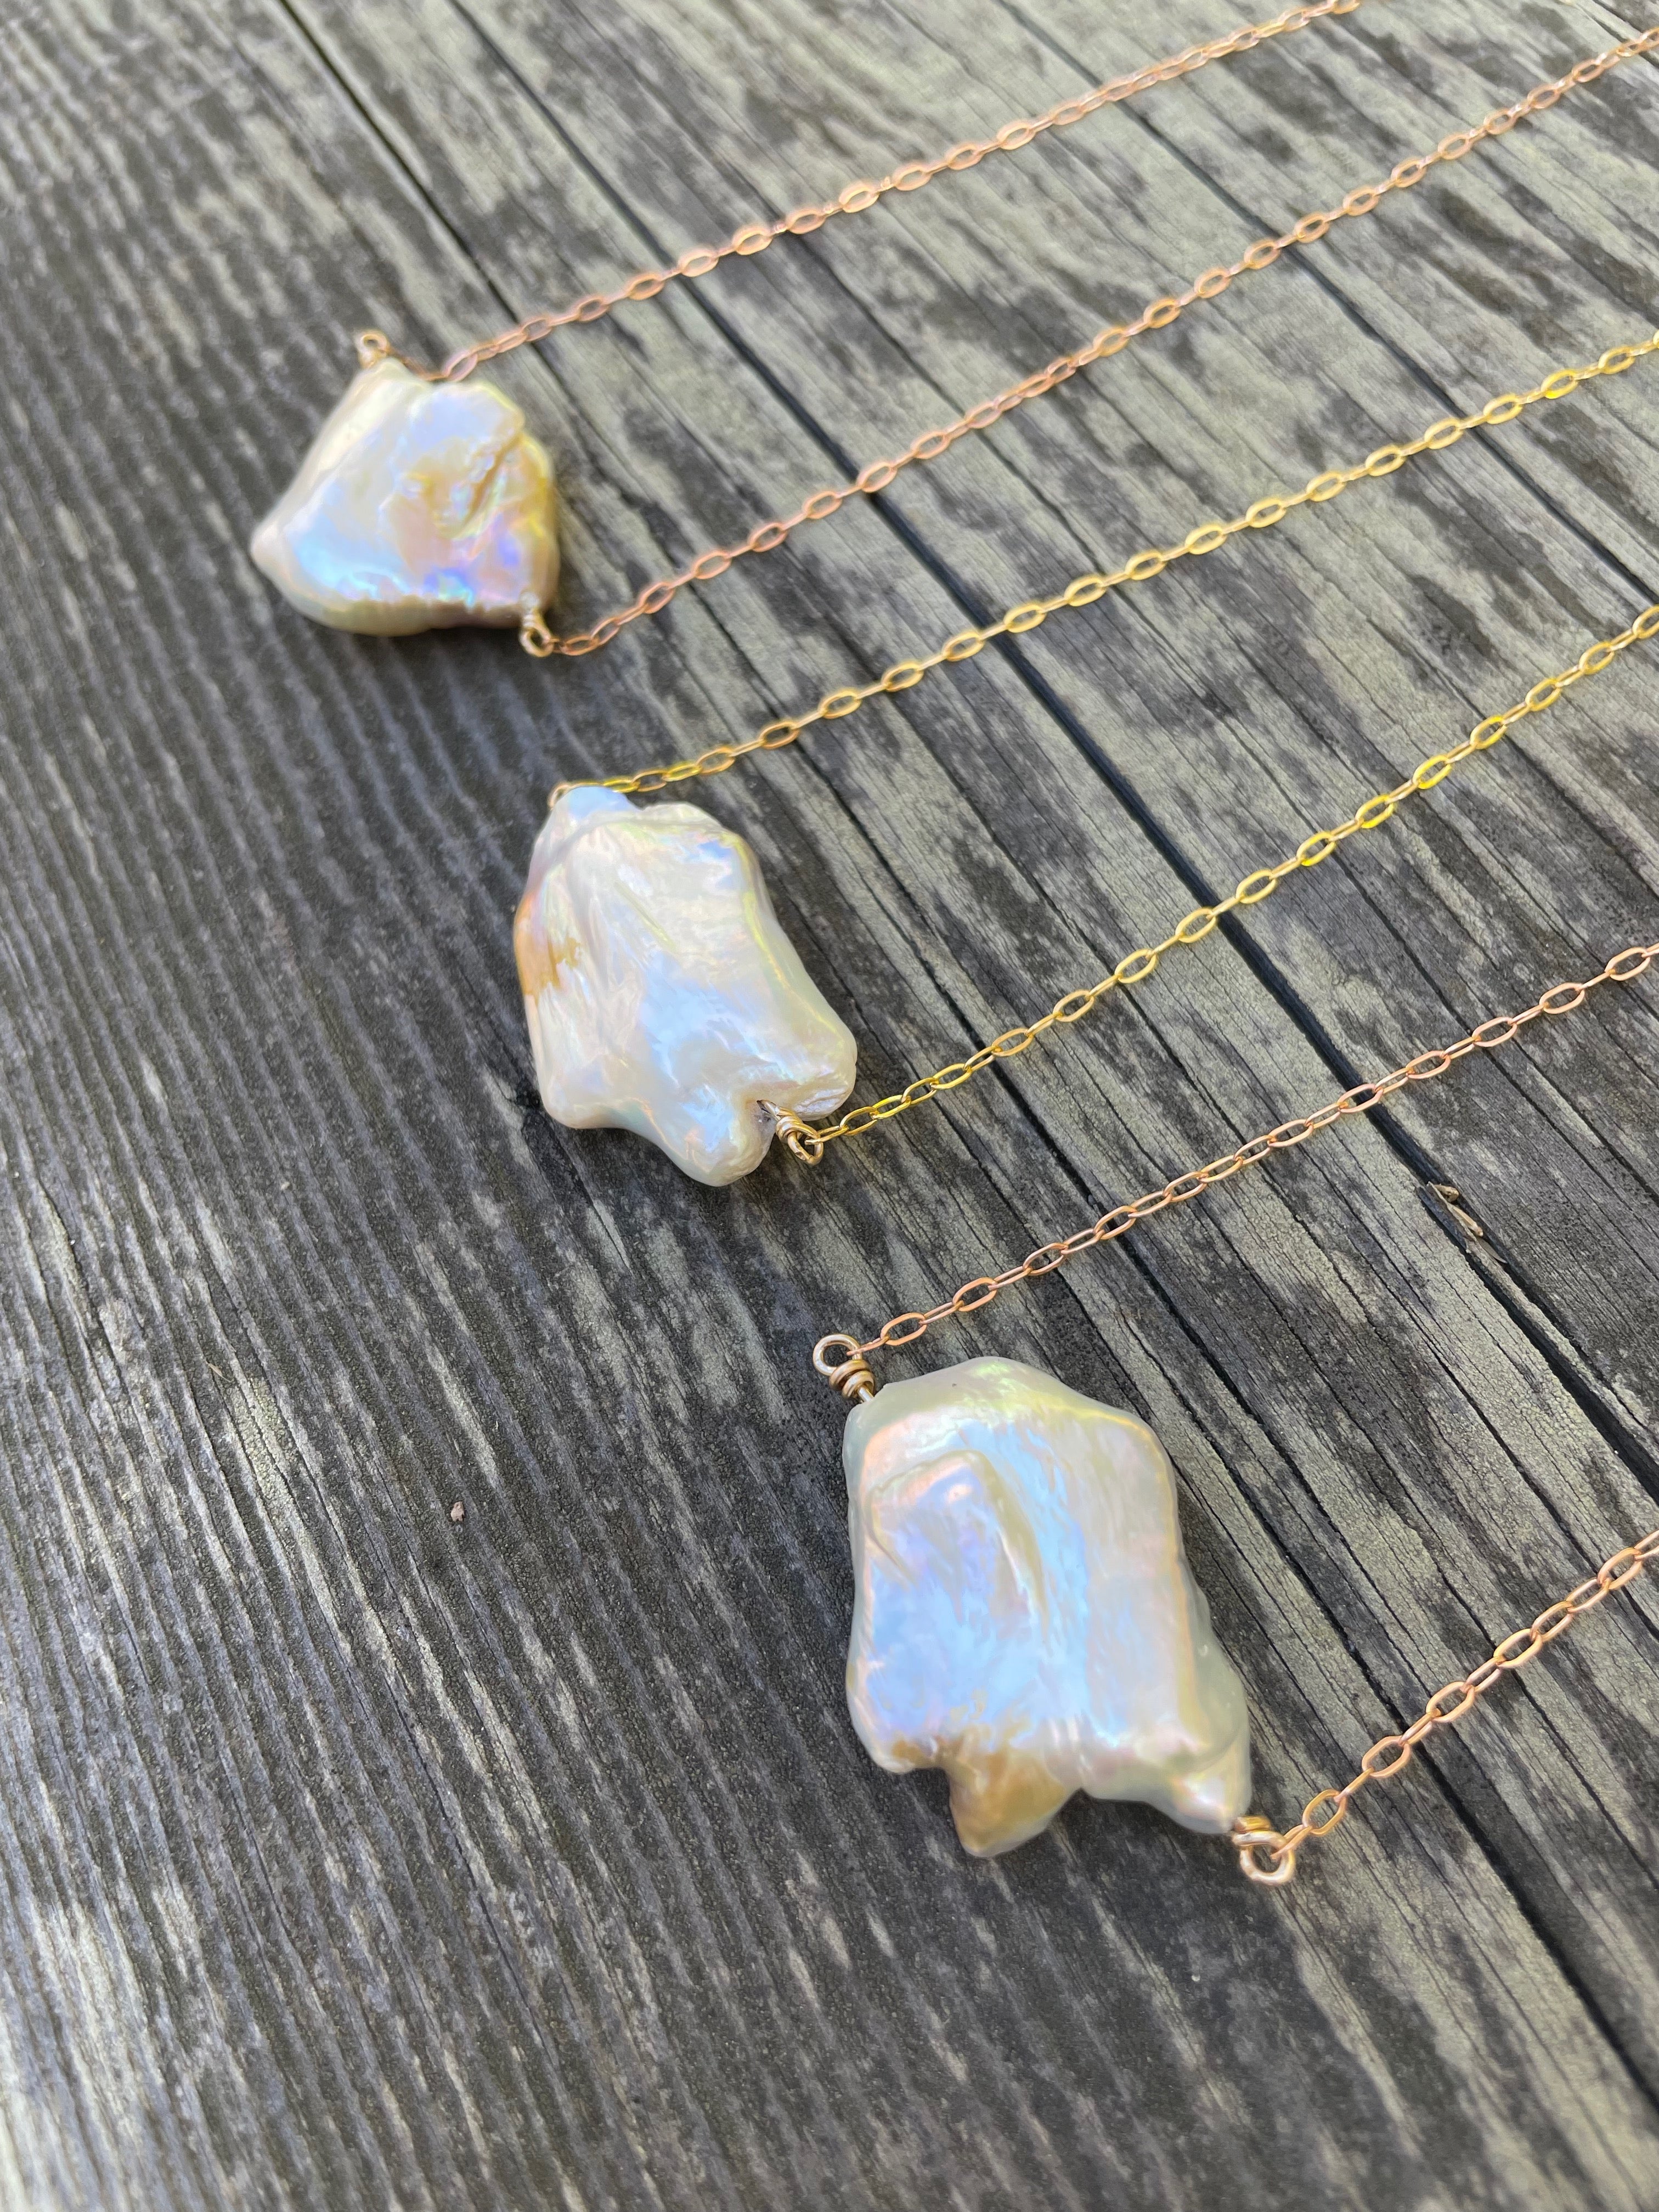 Three large white cloud shaped pearls on gold chains on a wood background